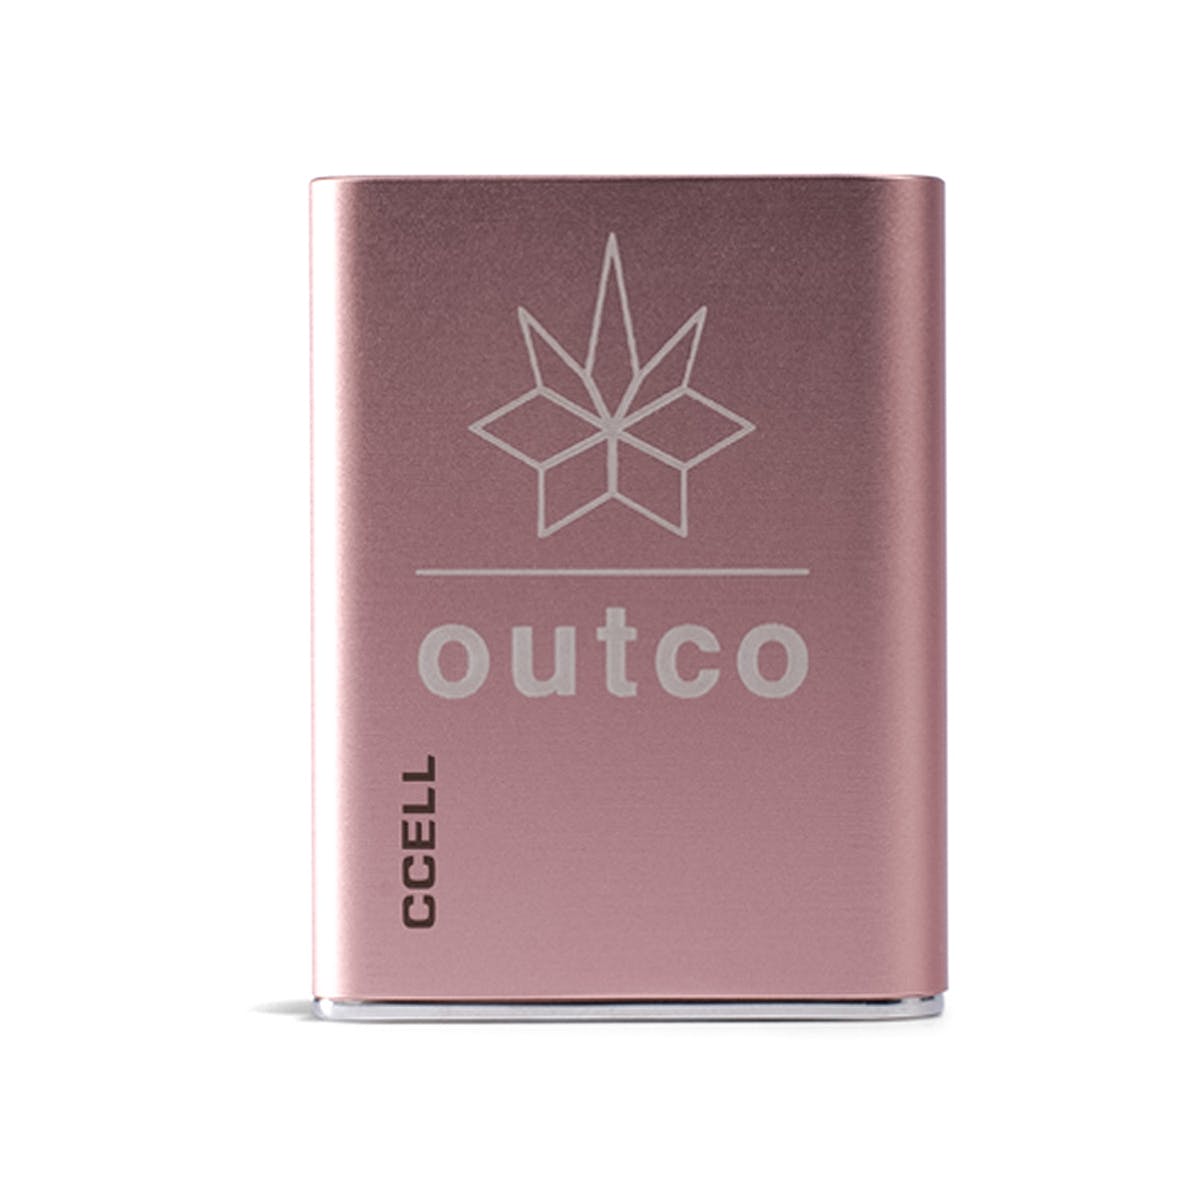 OutCo Palm Battery - Rose Gold